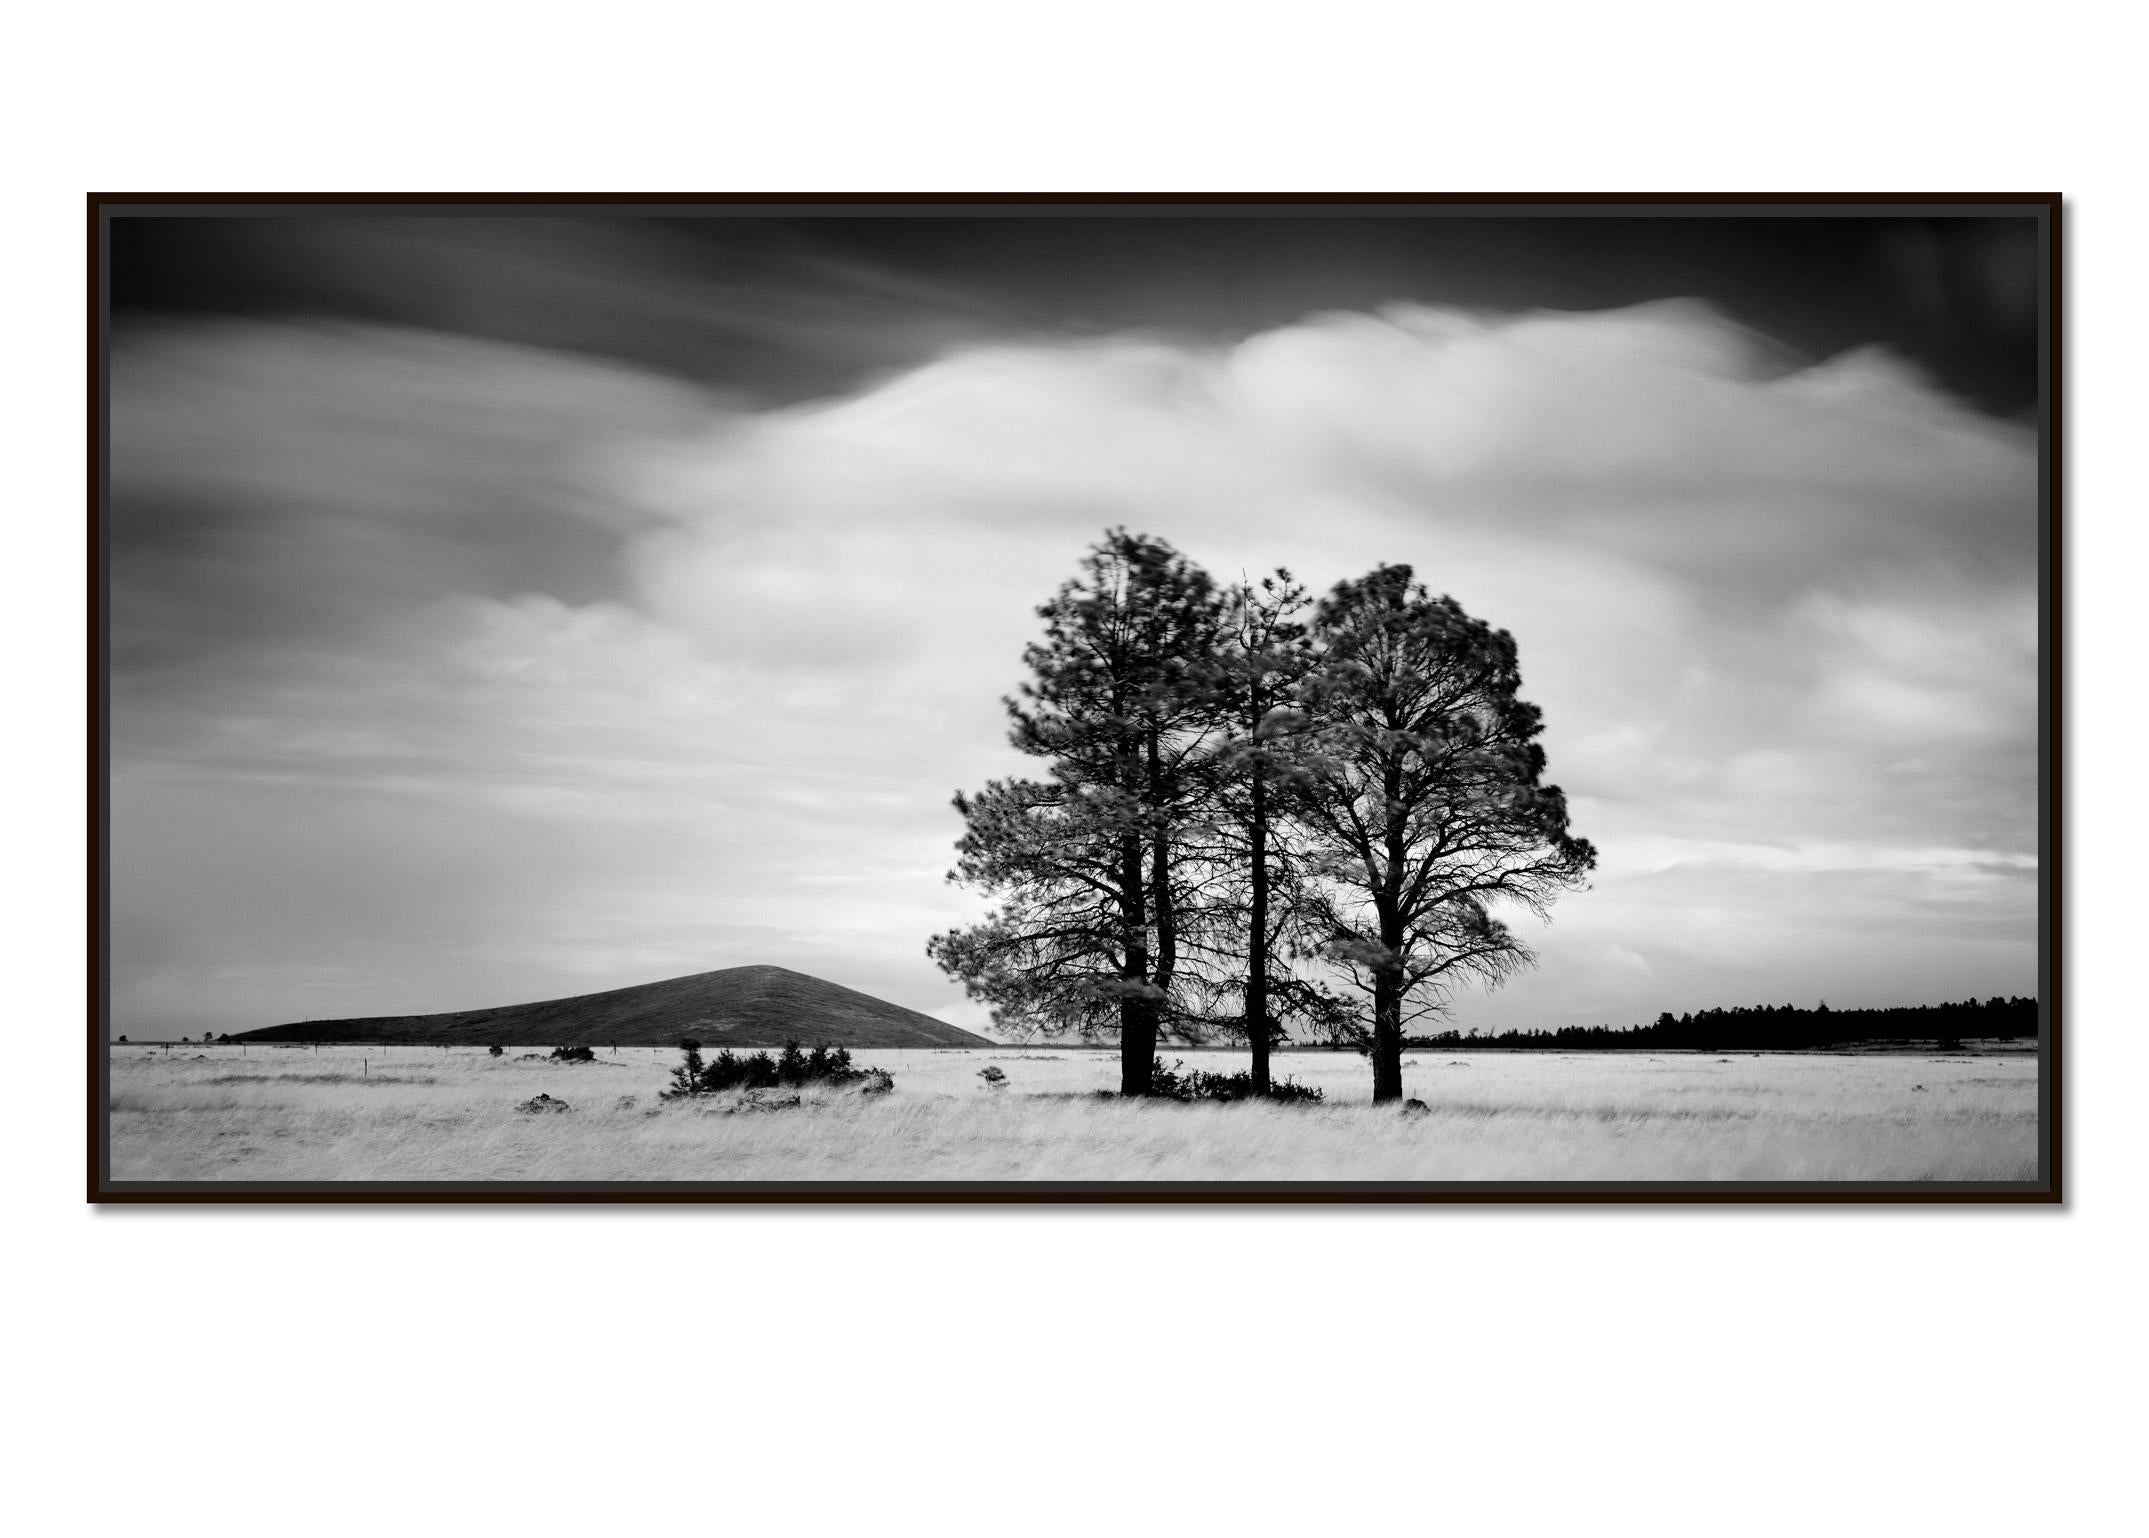 Golden Grass with Trees,  California, black and white photography, art landscape - Photograph by Gerald Berghammer